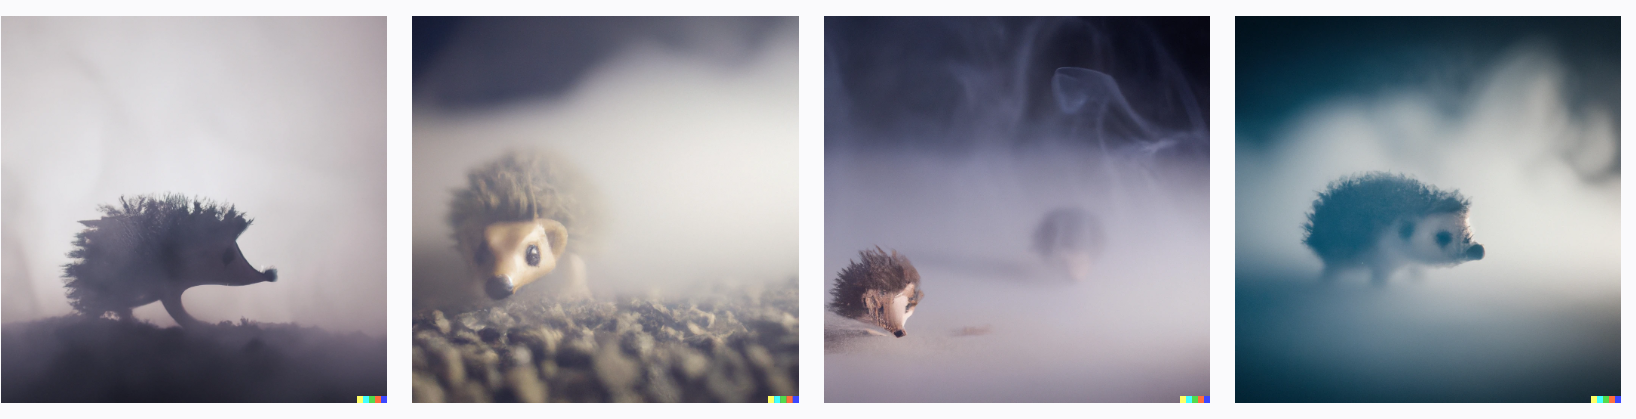 Hedgehog in the fog, stop motion animation style, hight resolution